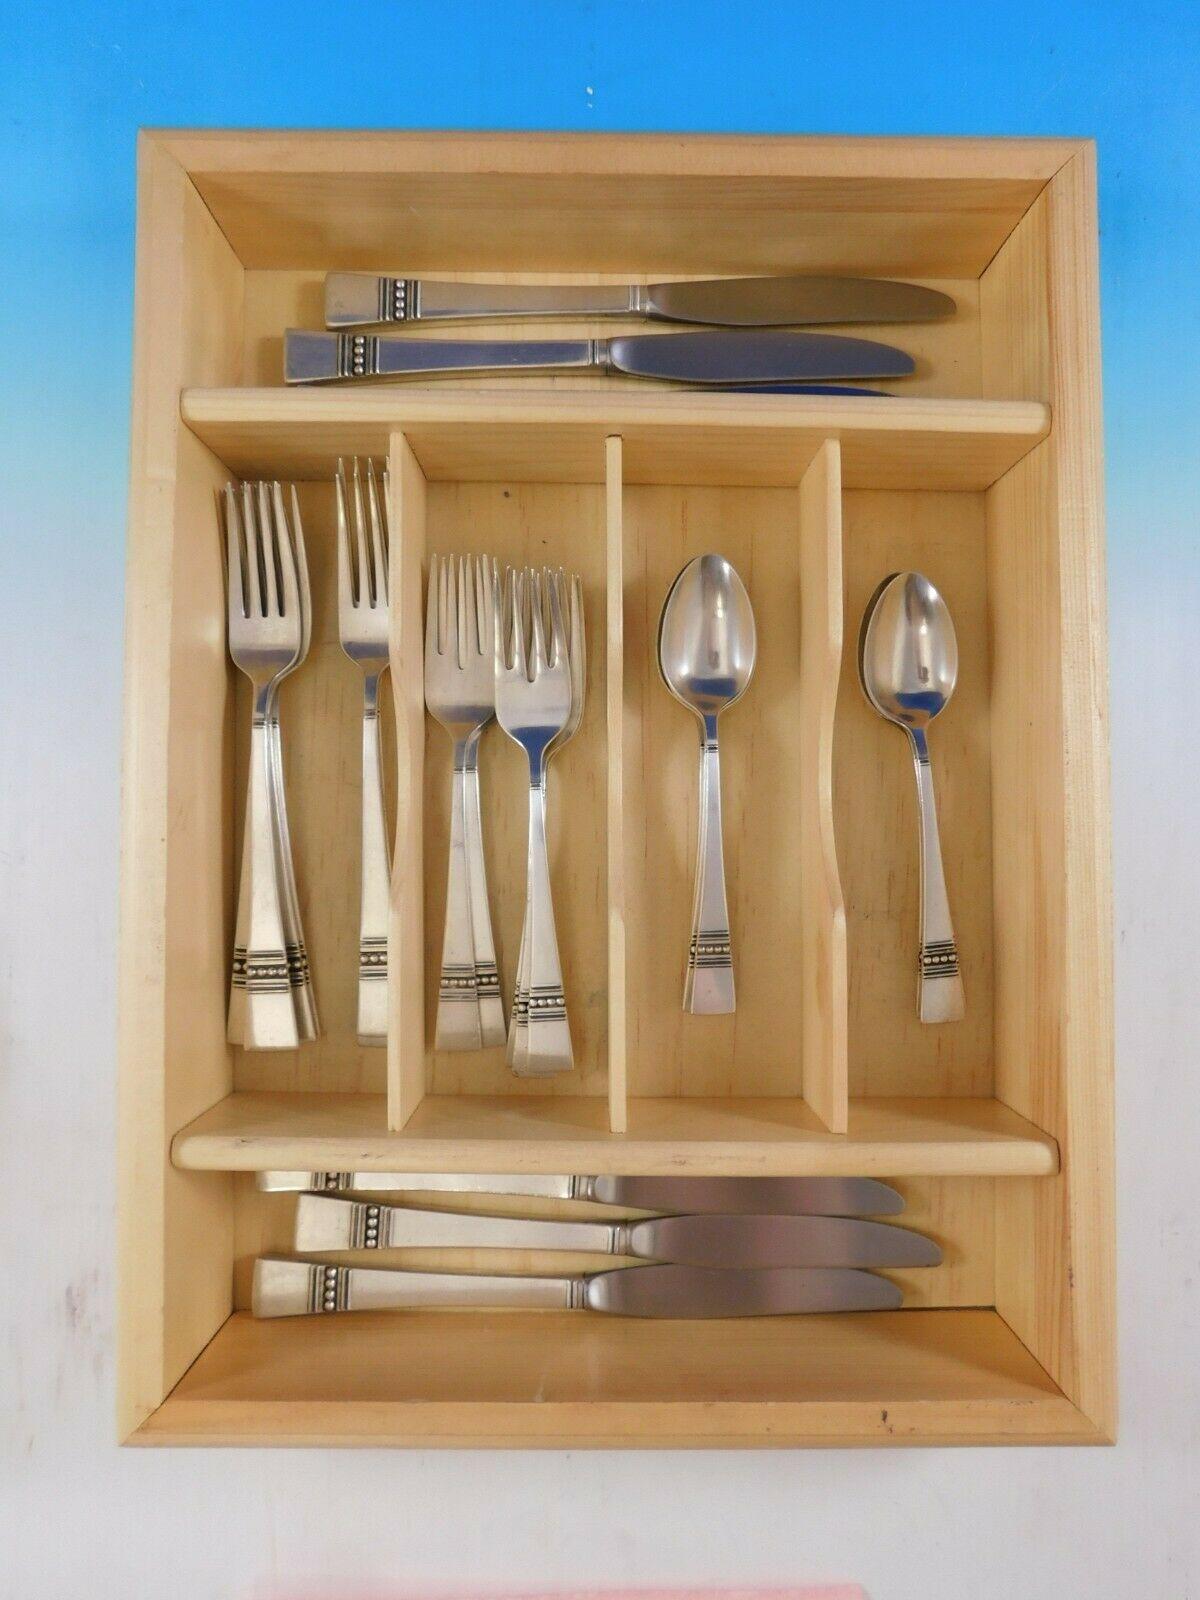 Diadem by Reed & Barton sterling silver flatware set, 24 pieces. This set includes:

6 knives, 8 3/4